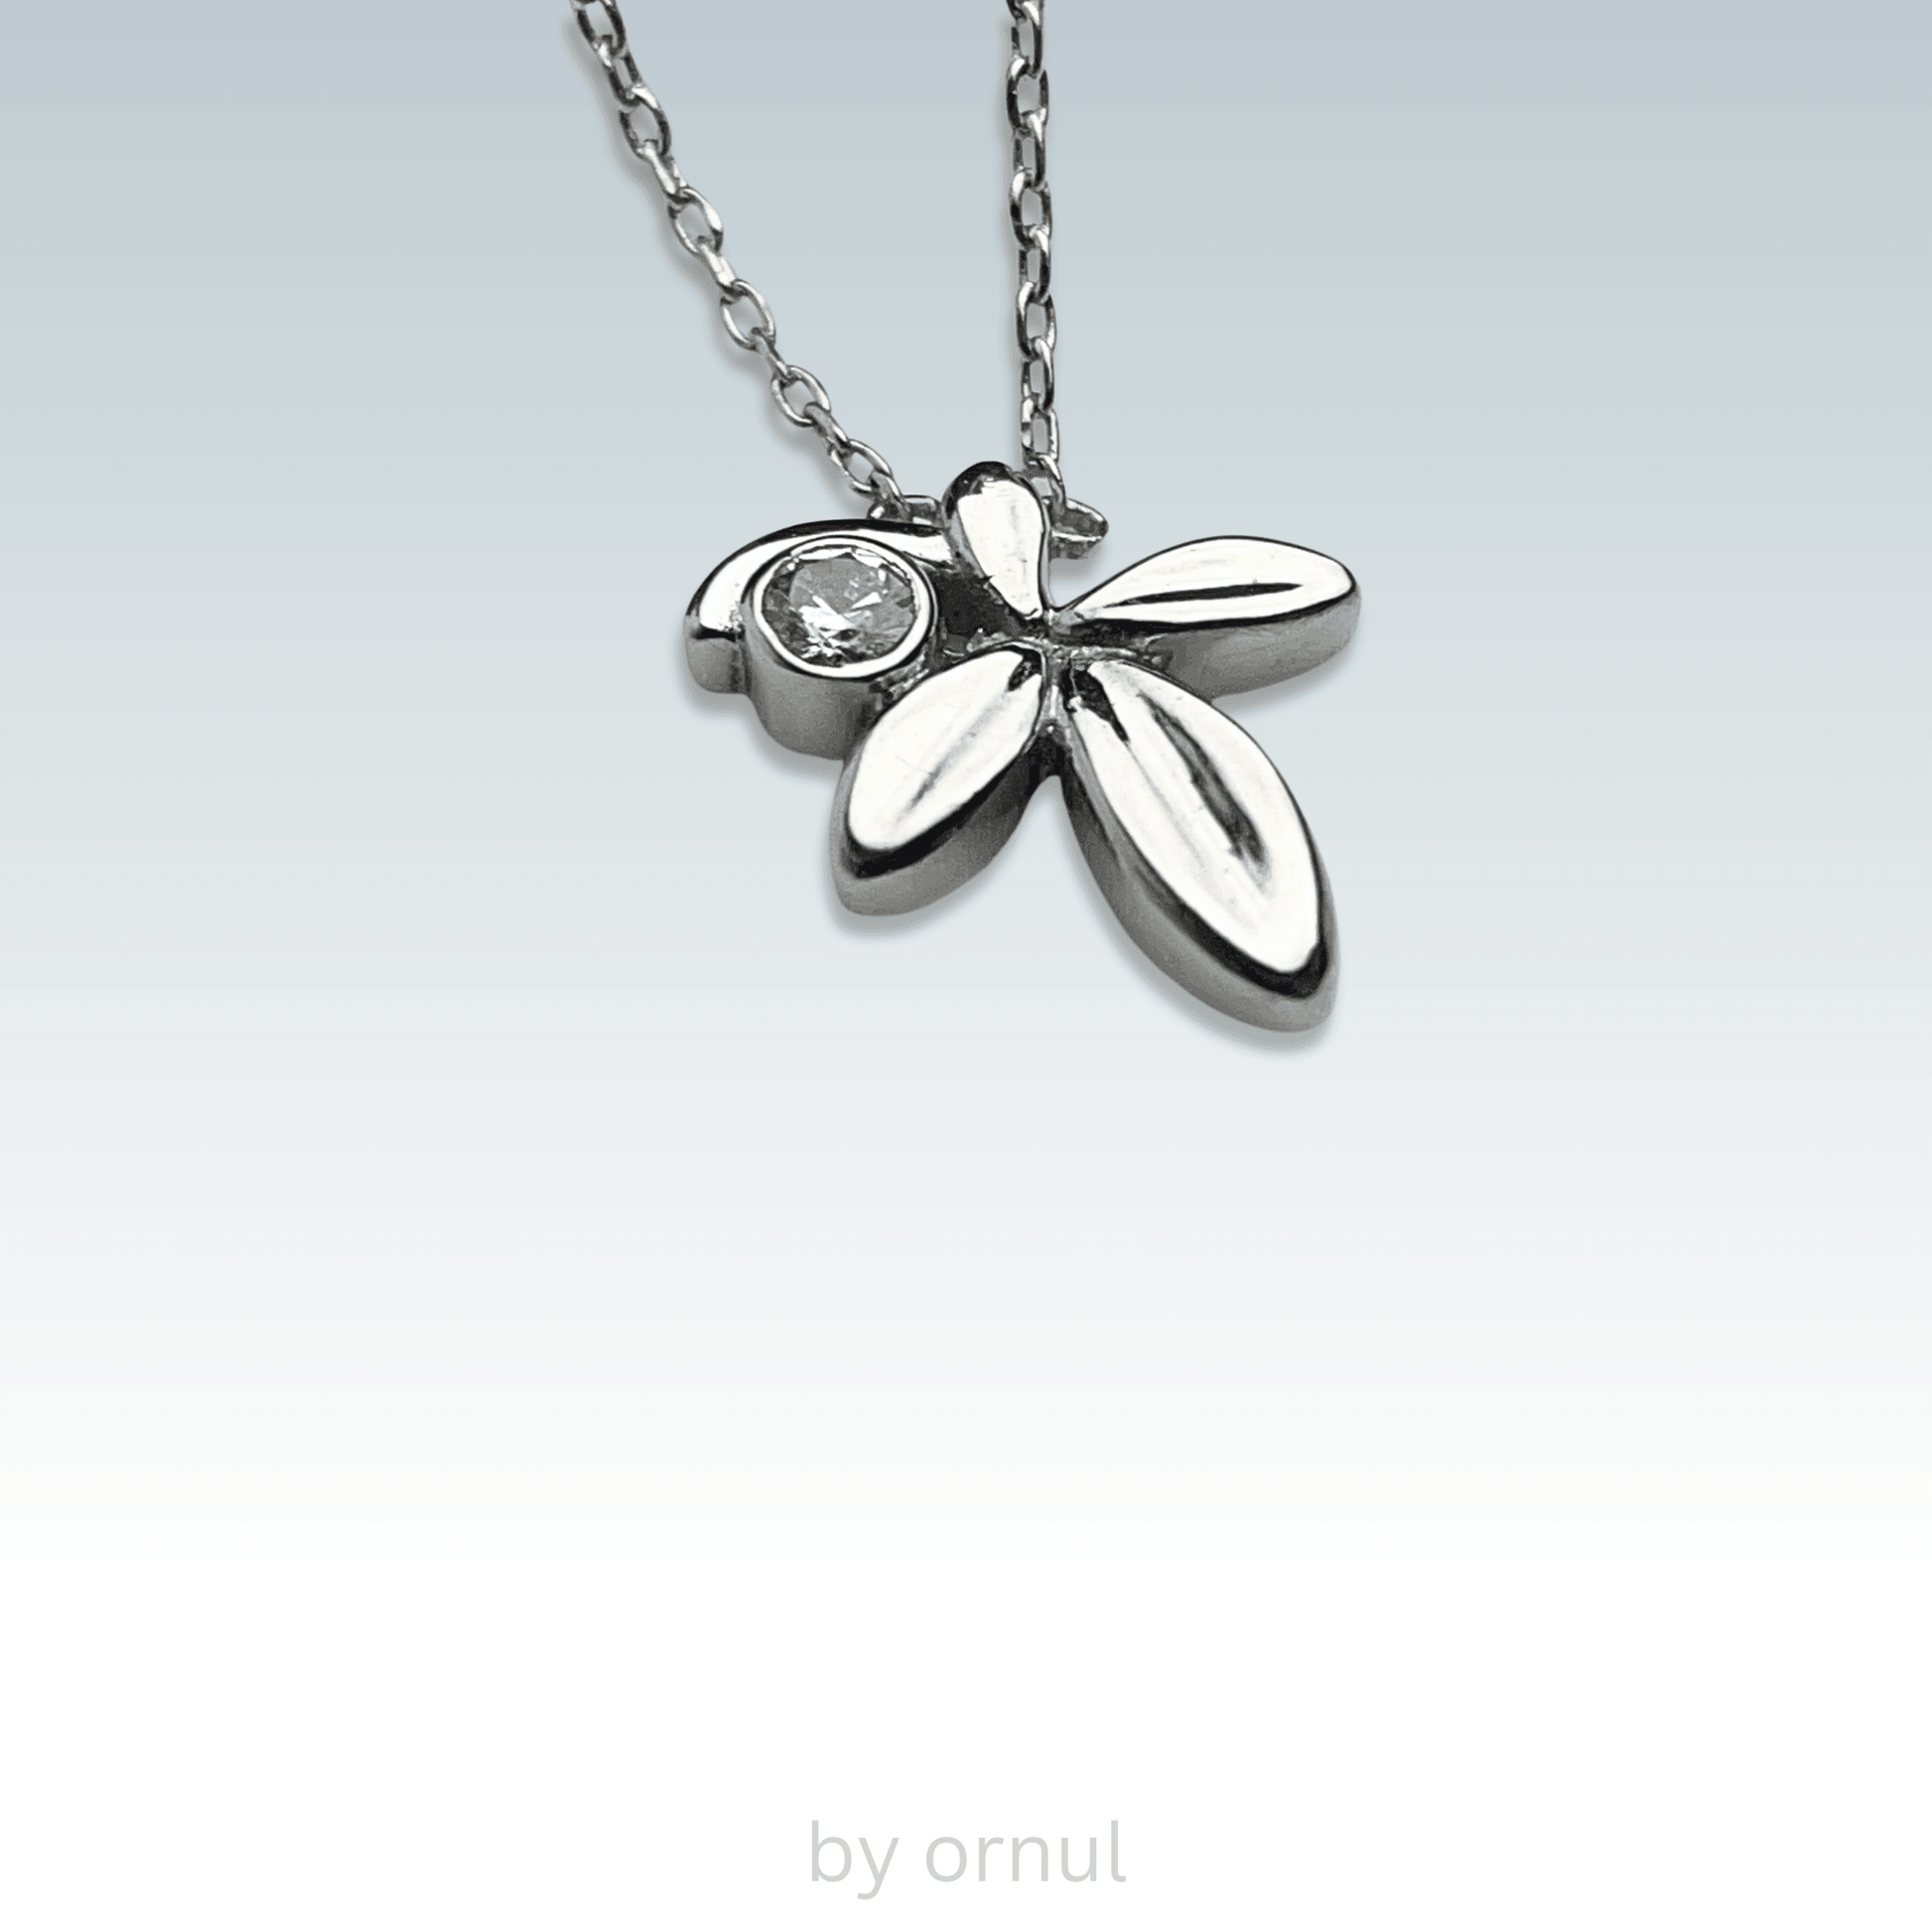 A dainty silver necklace featuring a charming flower pendant. Perfect for adding a touch of elegance to any outfit.